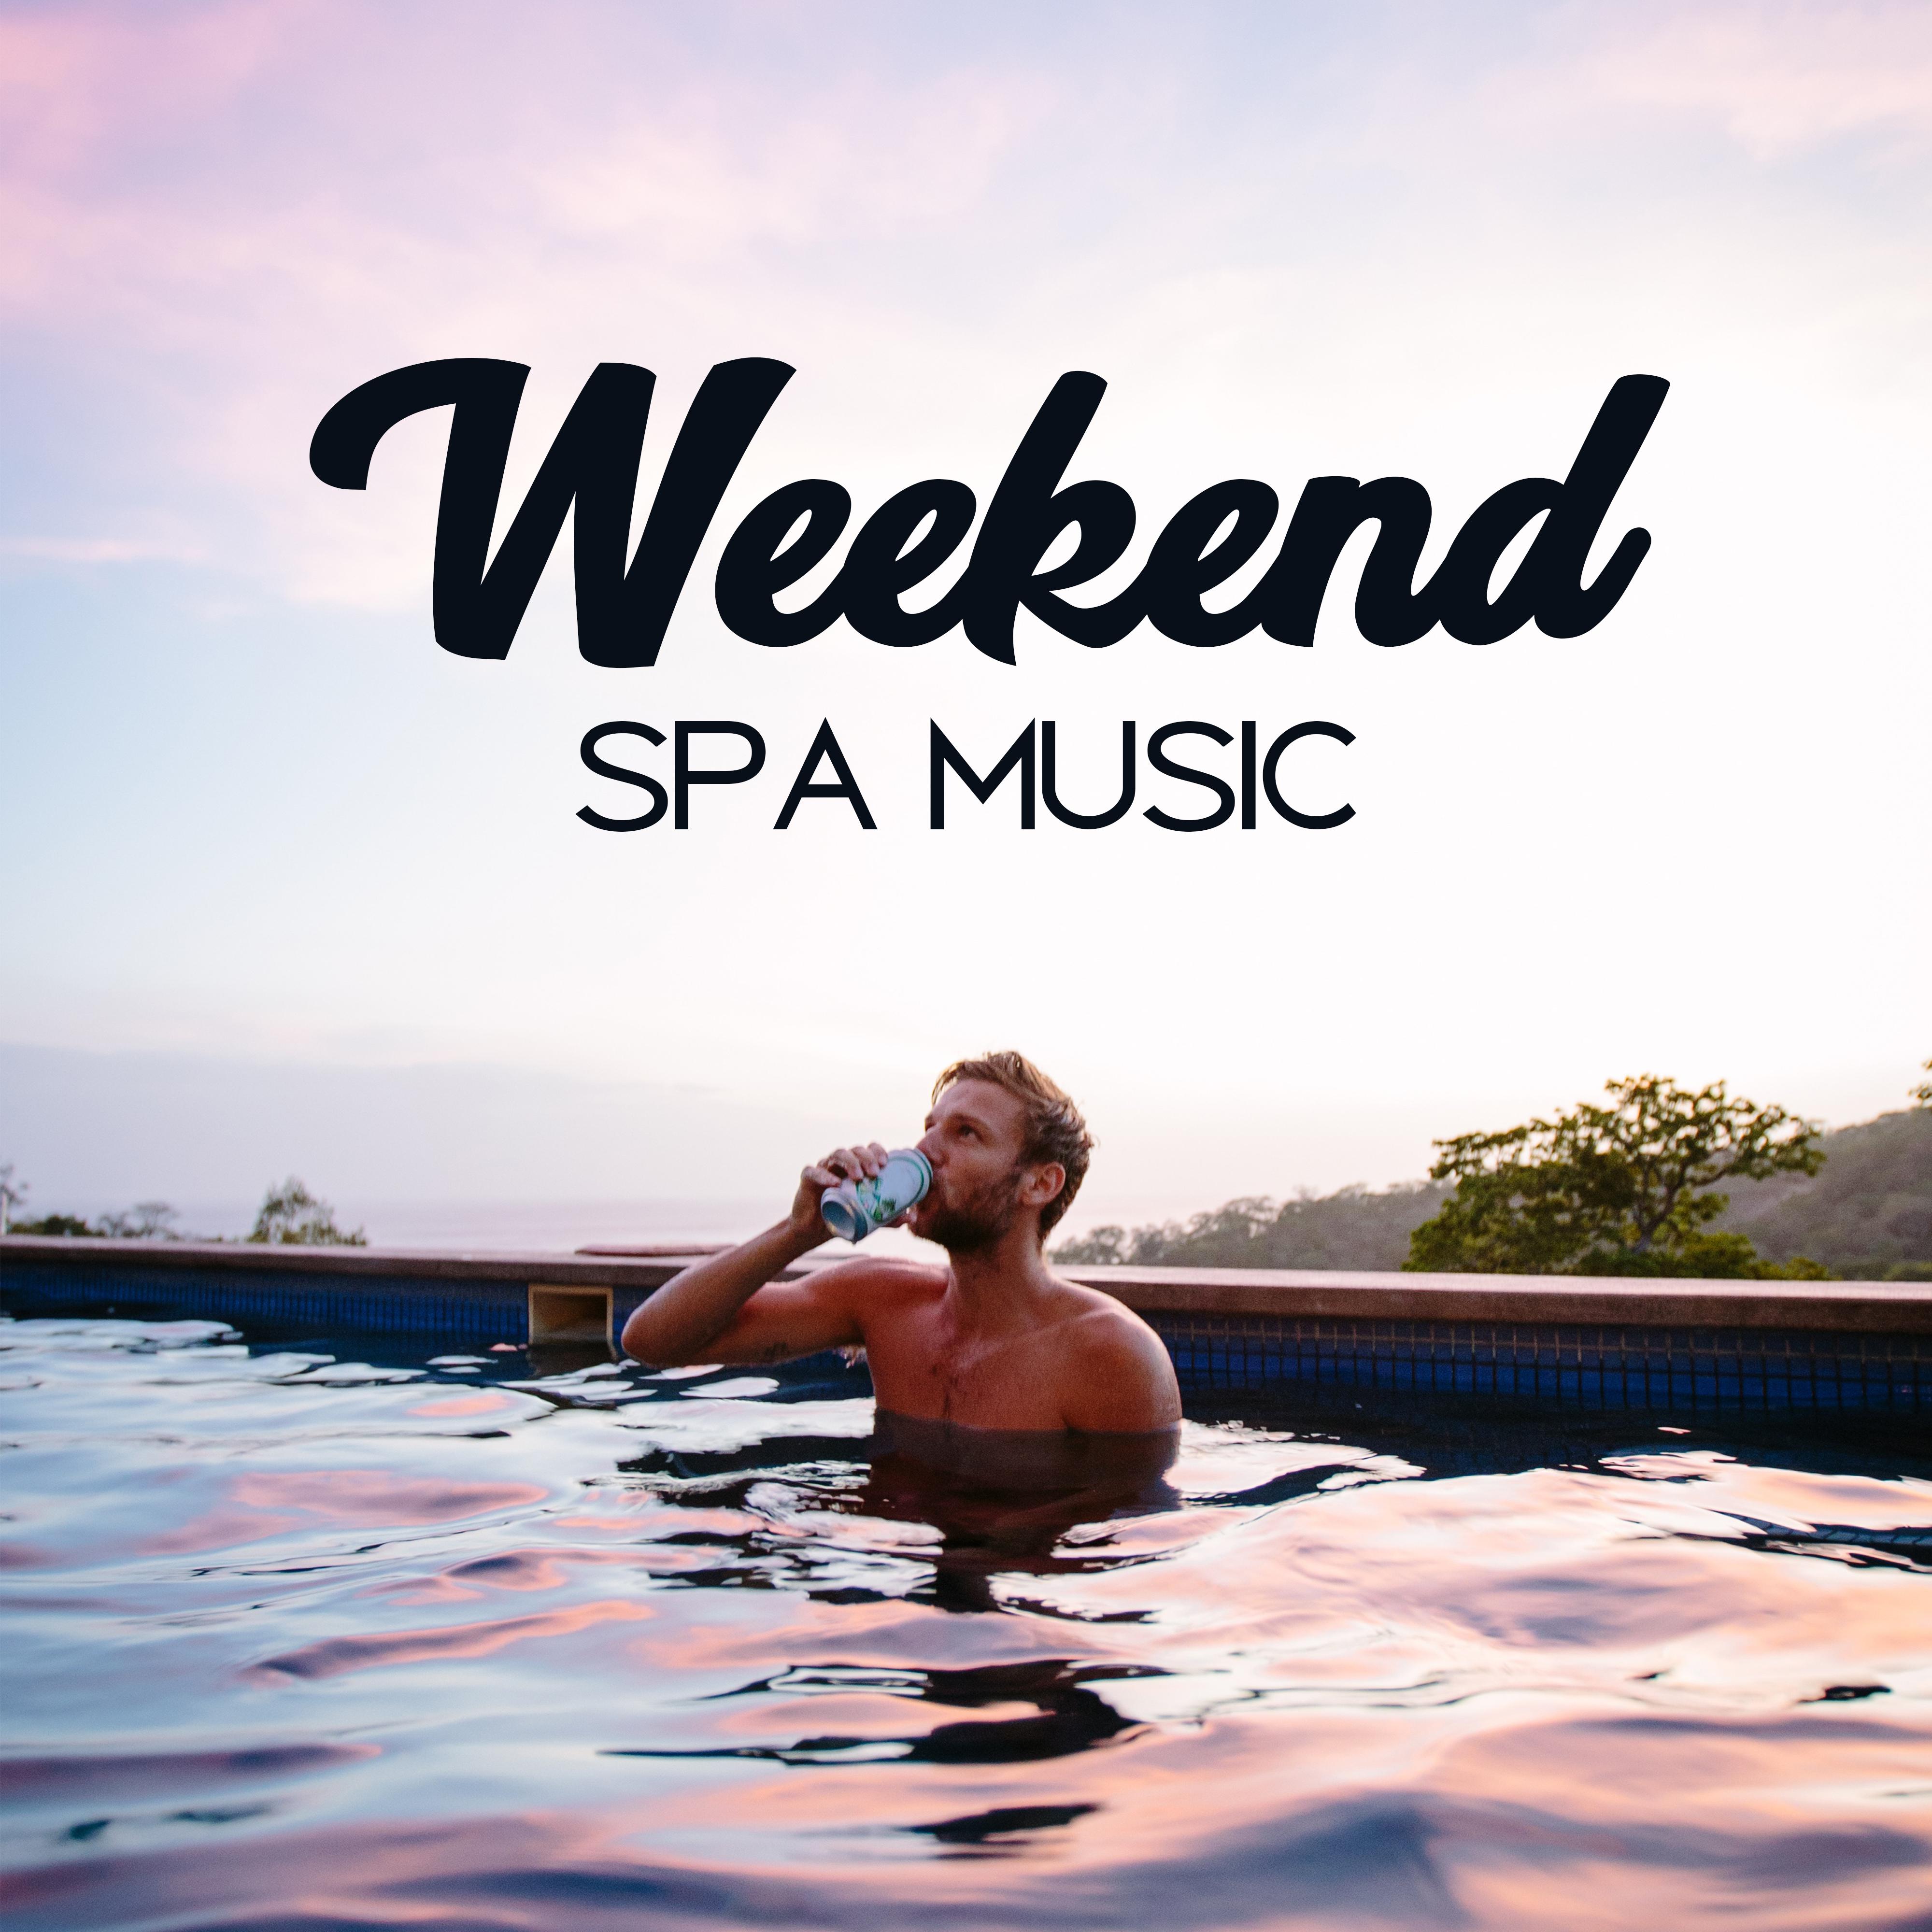 Weekend Spa Music  Relaxing Music for Hotel Spa  Wellness, Spa at Home, Bath Spa, Relax